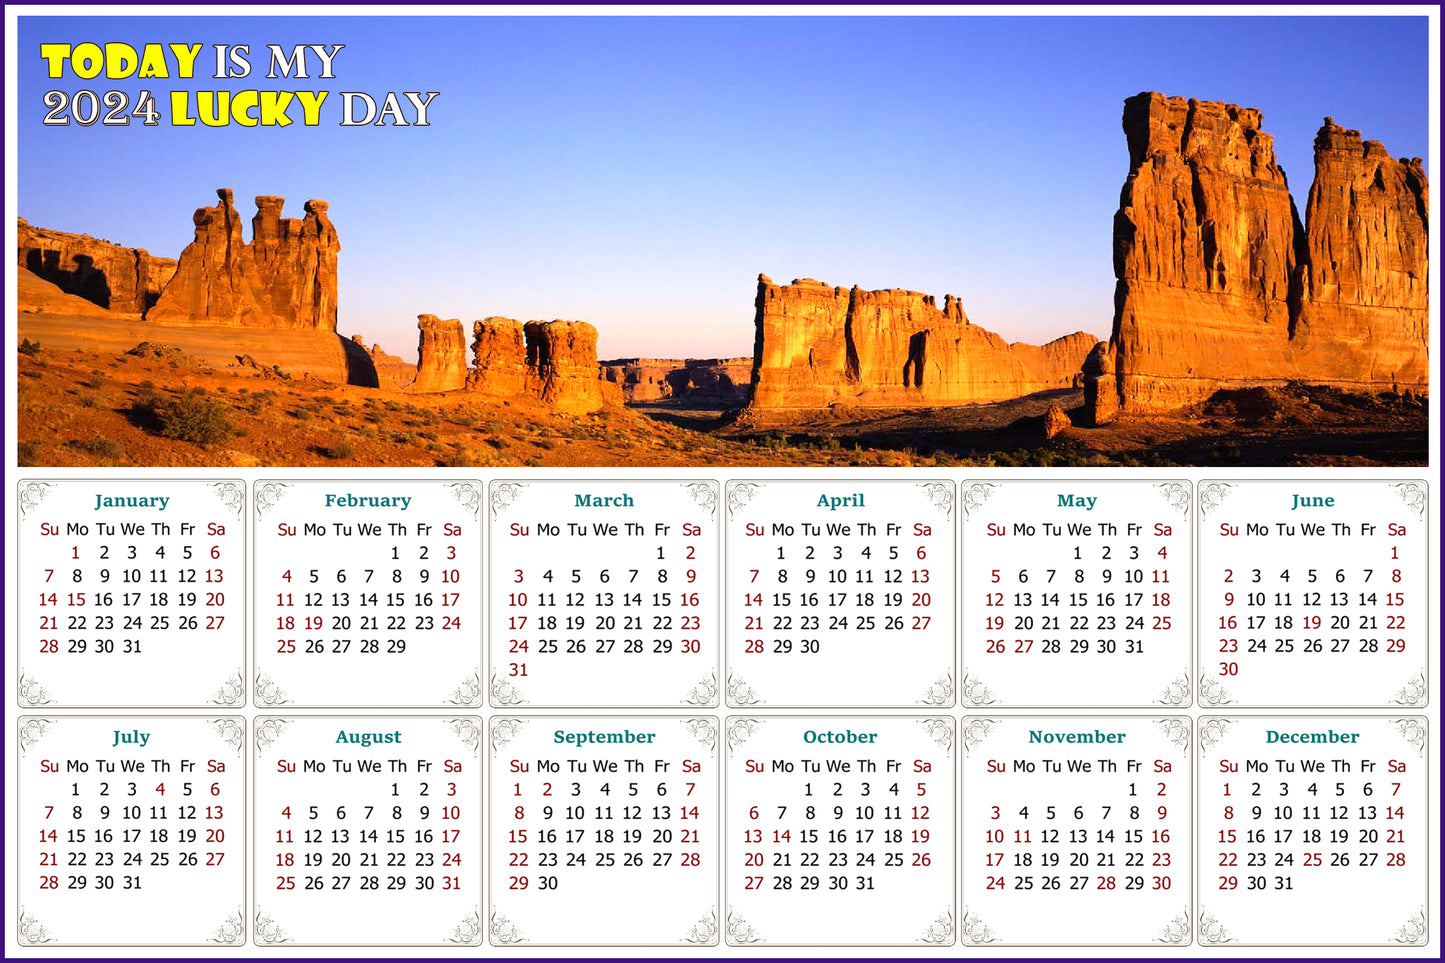 2024 Magnetic Calendar - Calendar Magnets - Today is My Lucky Day (Arches National Park)